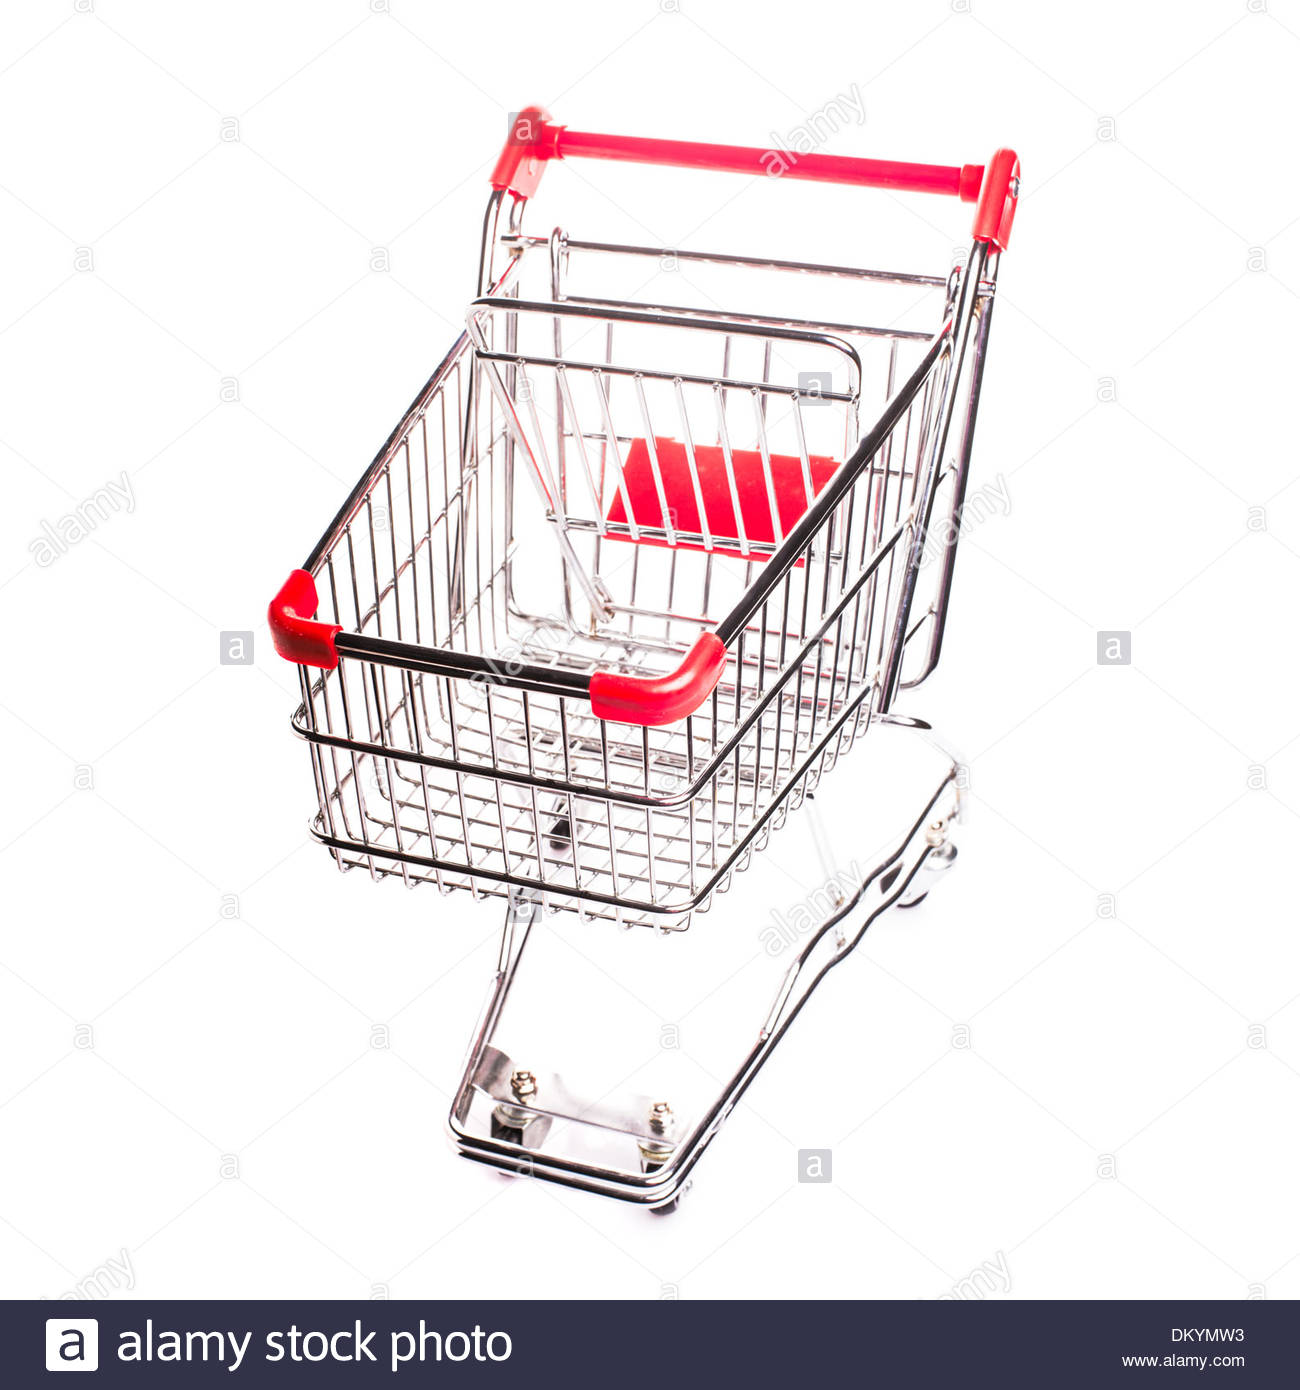 Red Matal Shopping Trolley Isolated On White Background Stock